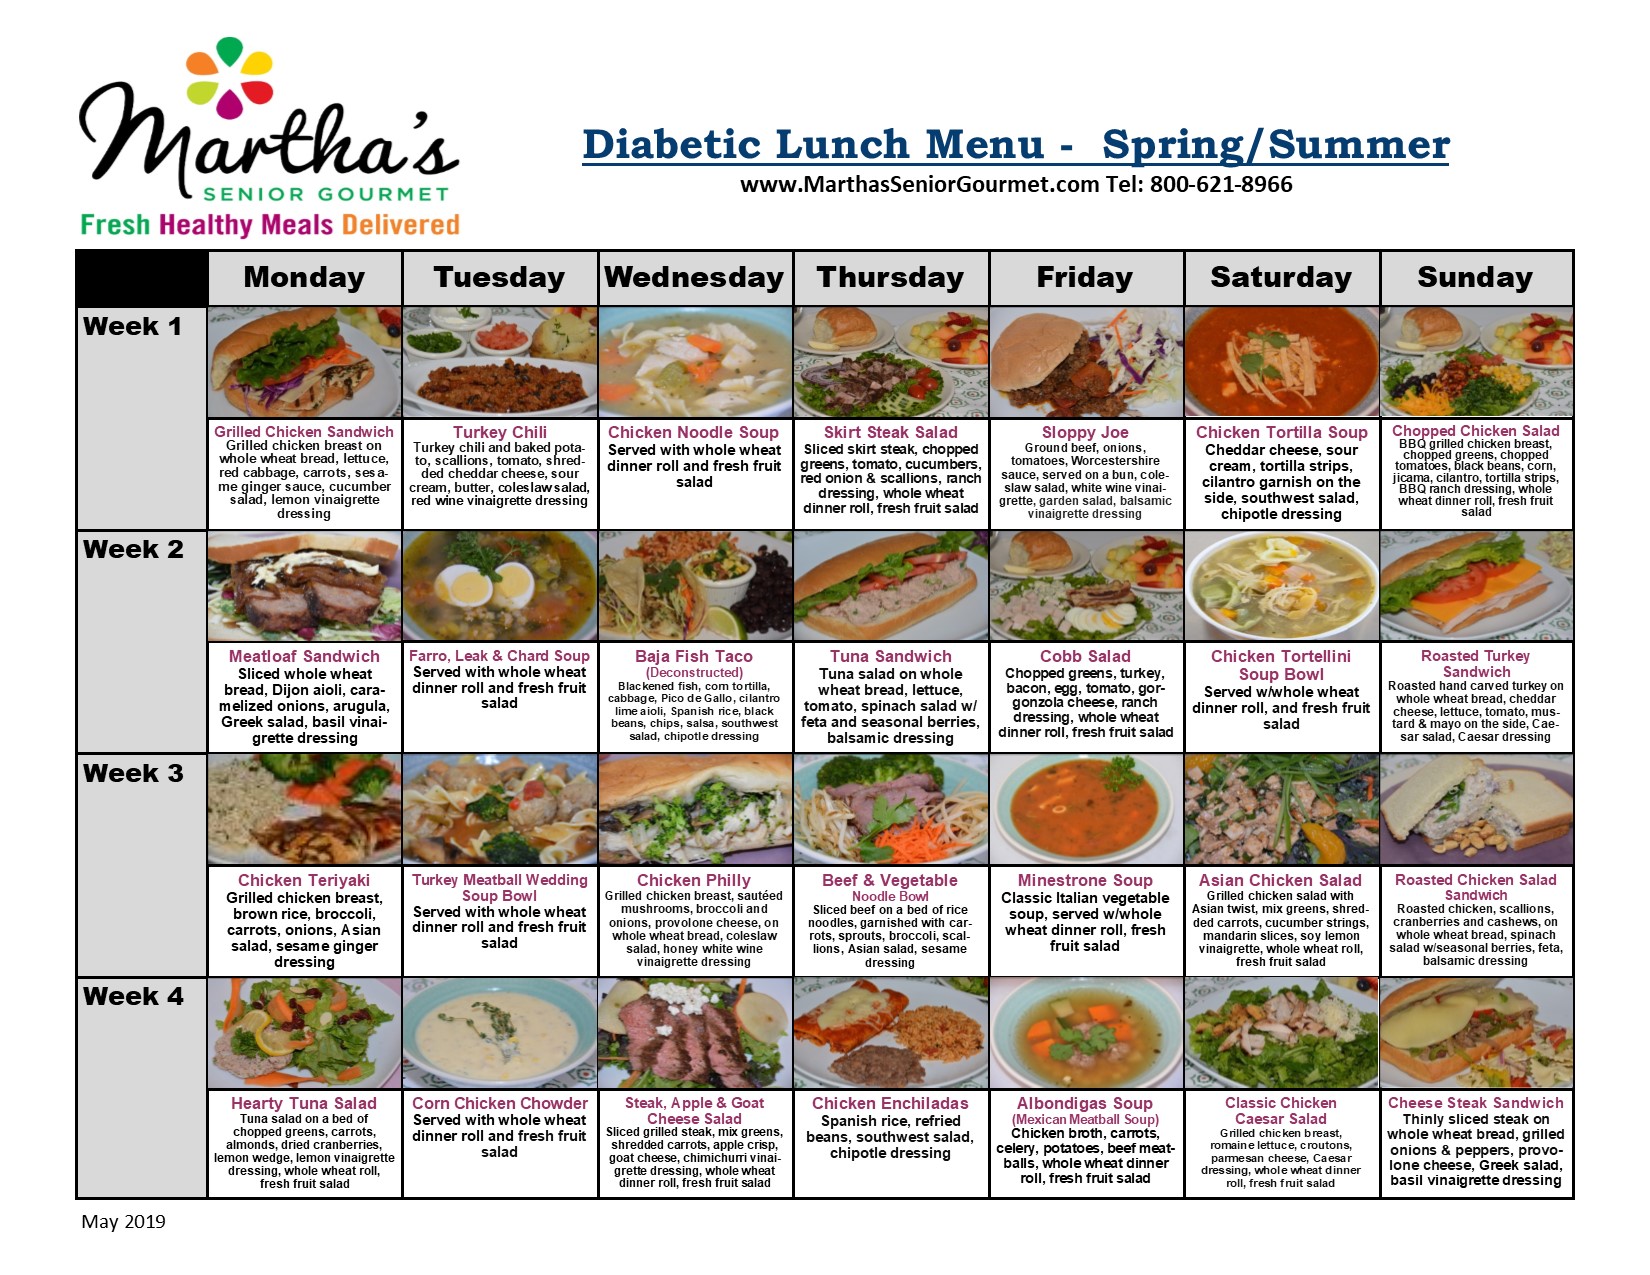 Dinner Menu For Diabetic Patients | Daily Nail Art And Design